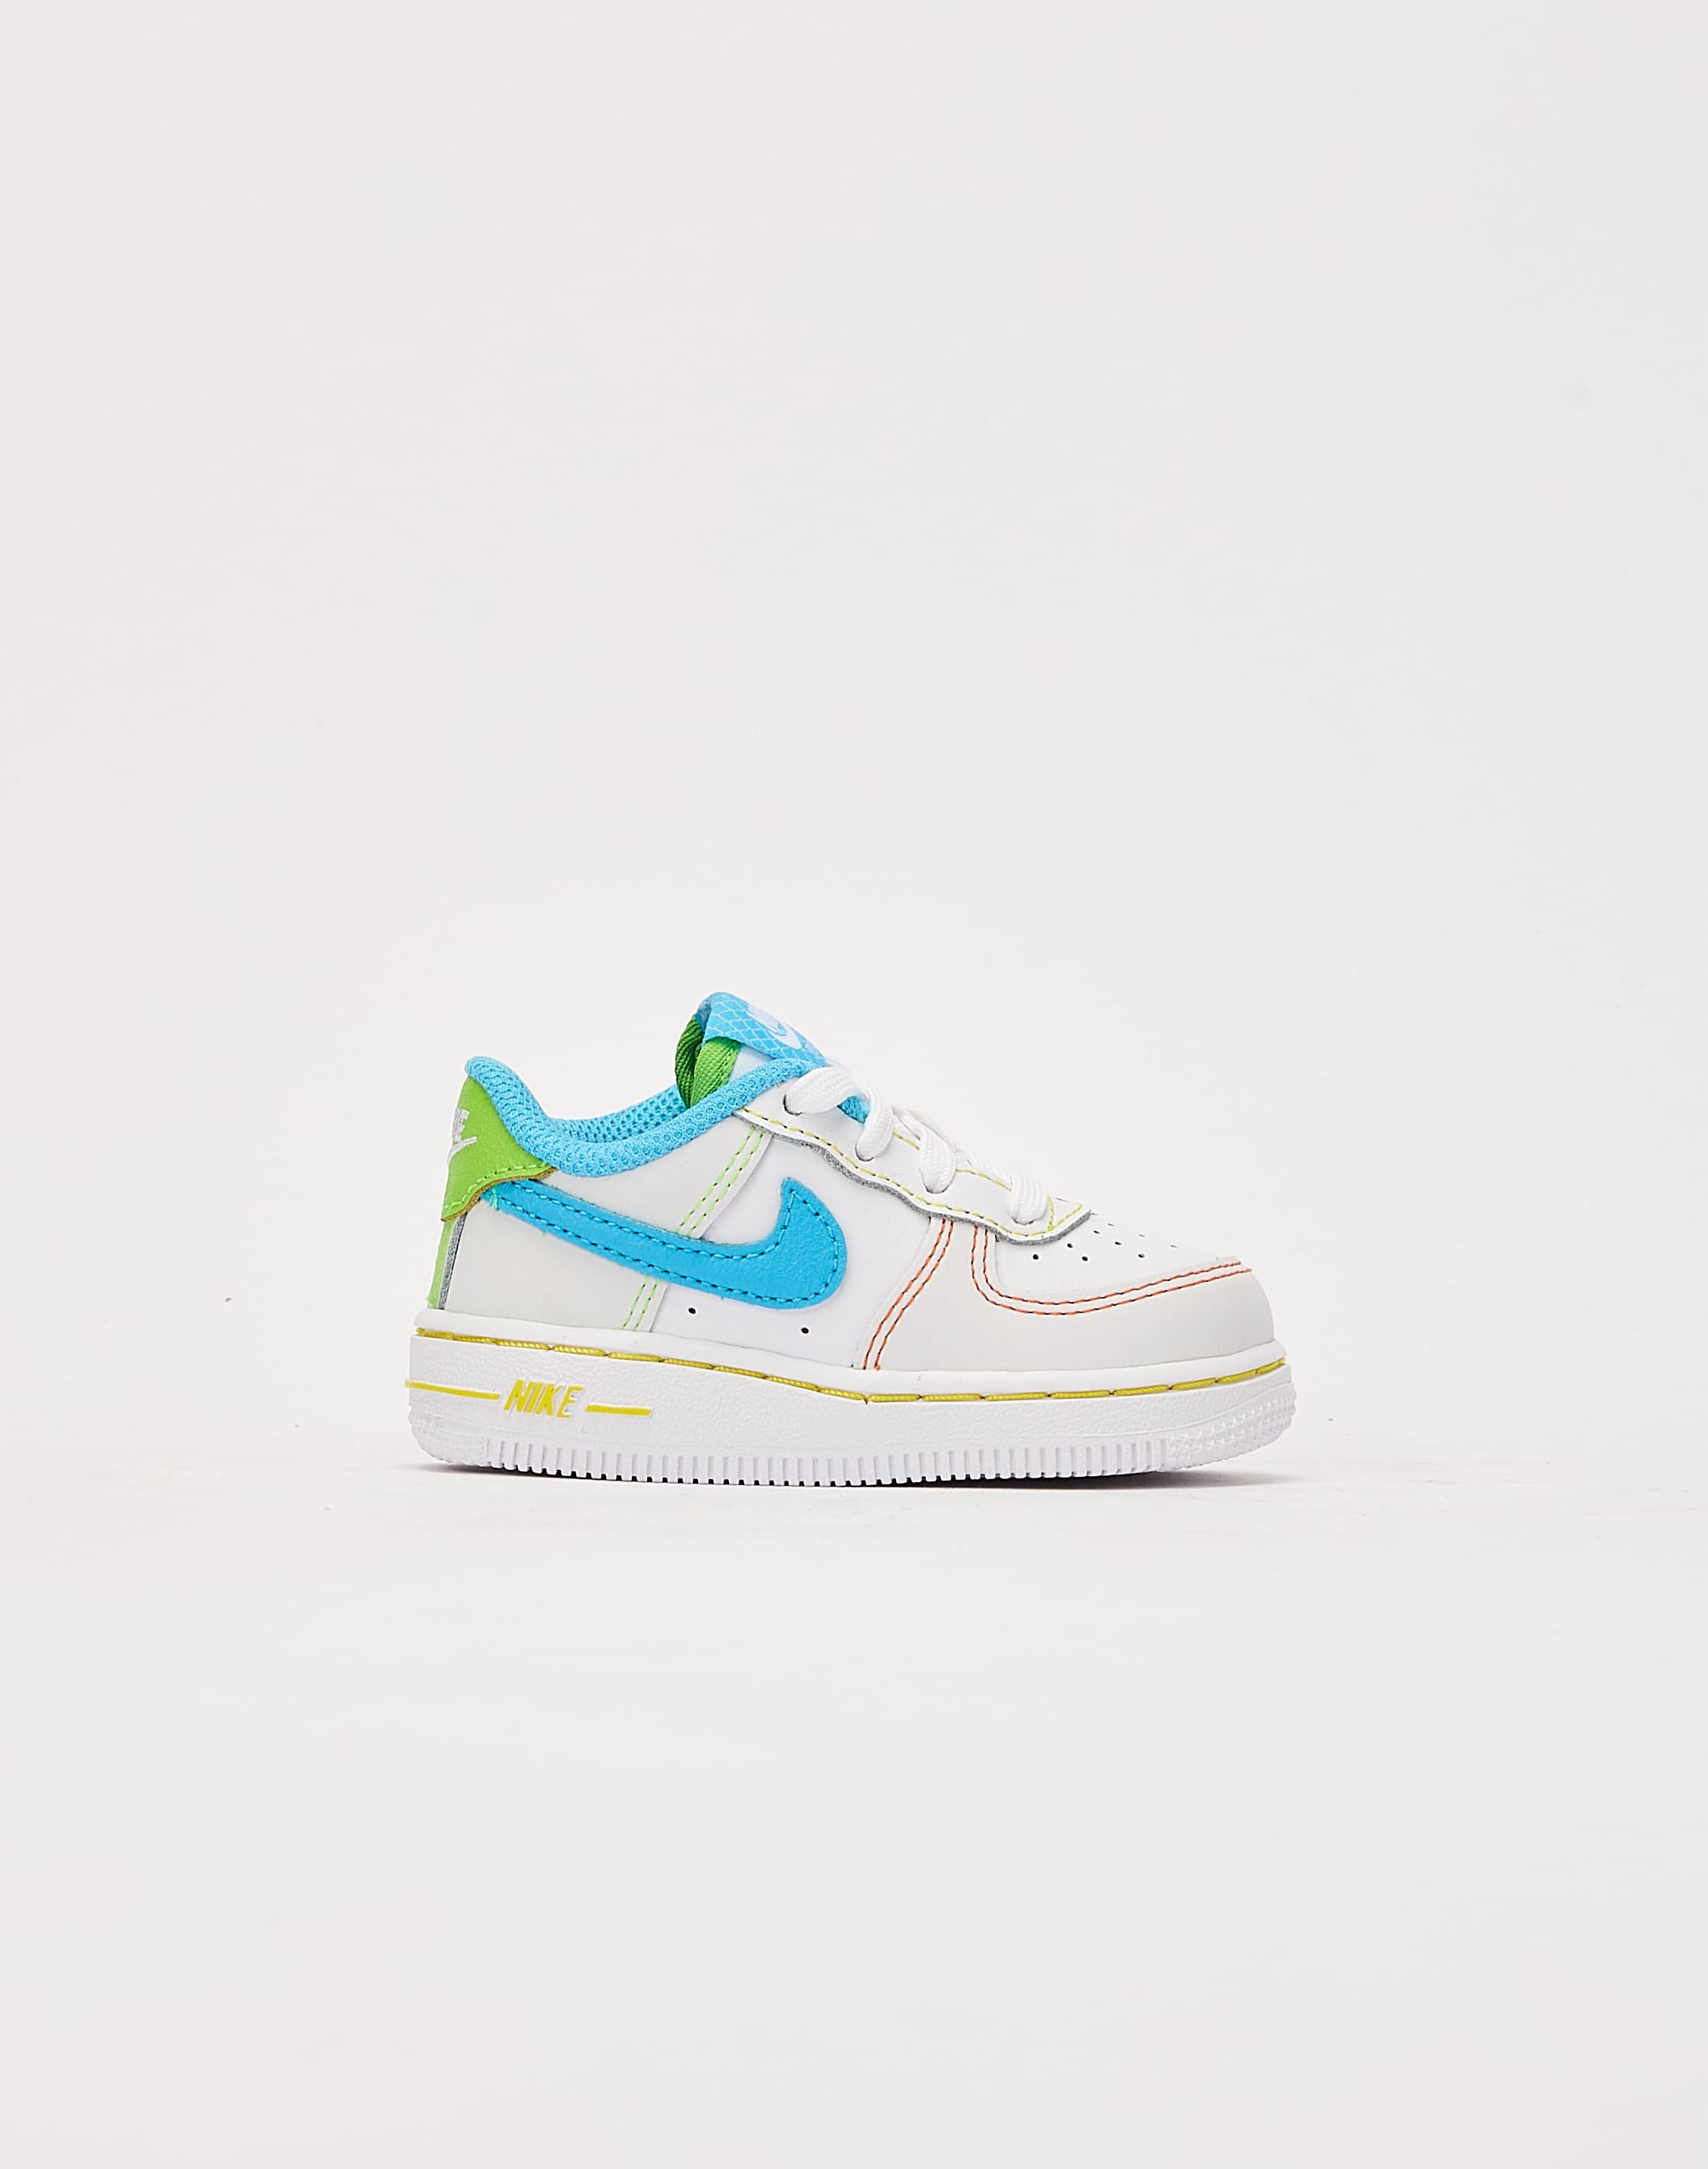 Kids Off-White Air Force 1 LV8 2 Big Kids Sneakers by Nike